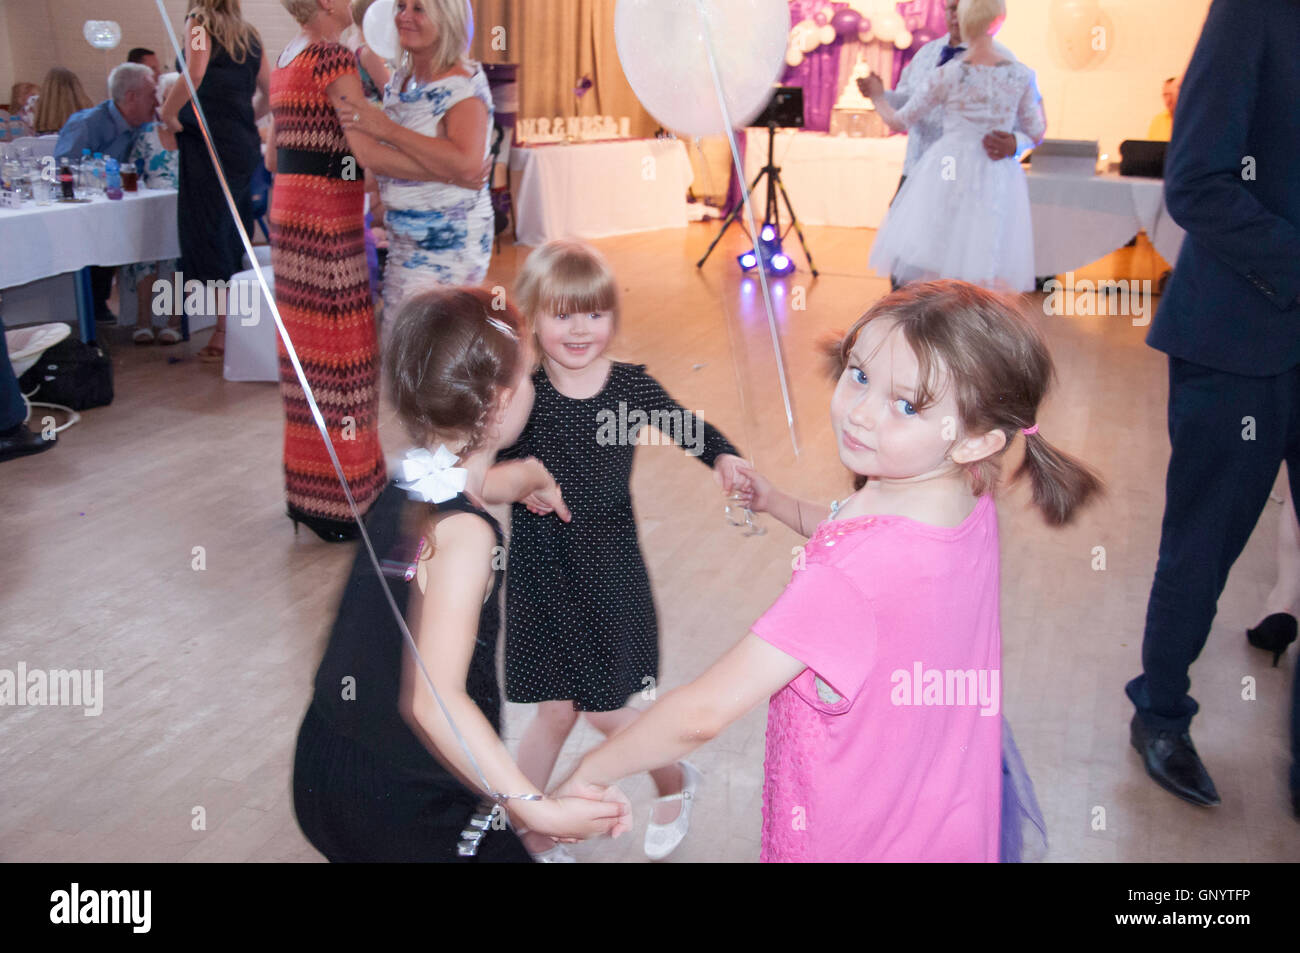 Children dancing at wedding reception, Staines-upon-Thames, Surrey, England, United Kingdom Stock Photo